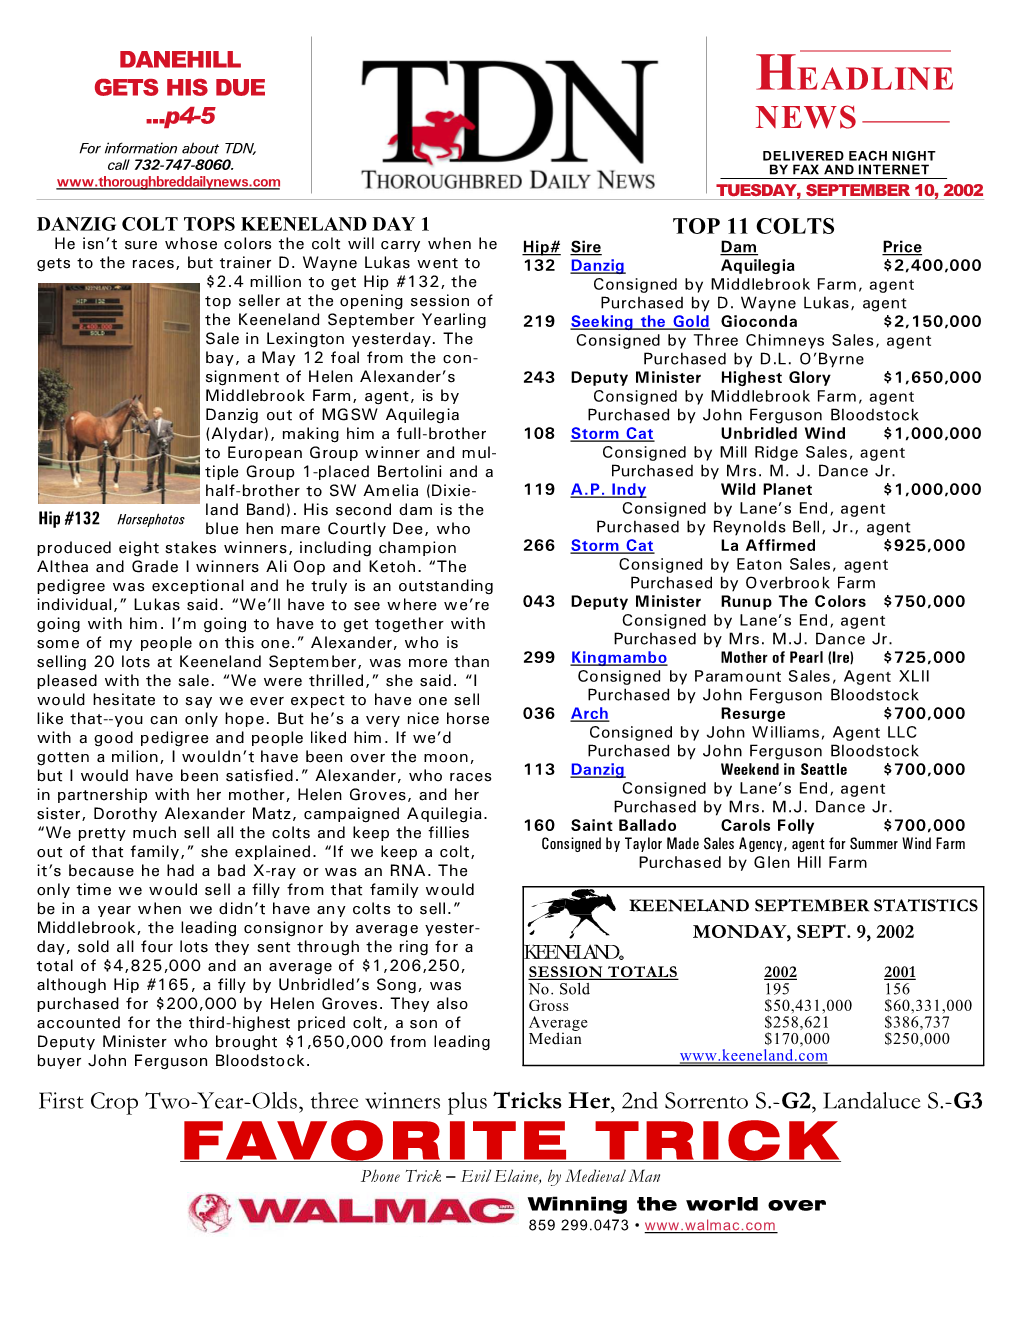 FAVORITE TRICK Phone Trick S Evil Elaine, by Medieval Man Winning the World Over 859 299.0473 • TDN P HEADLINE NEWS • 9/10/02 • PAGE 2 of 6